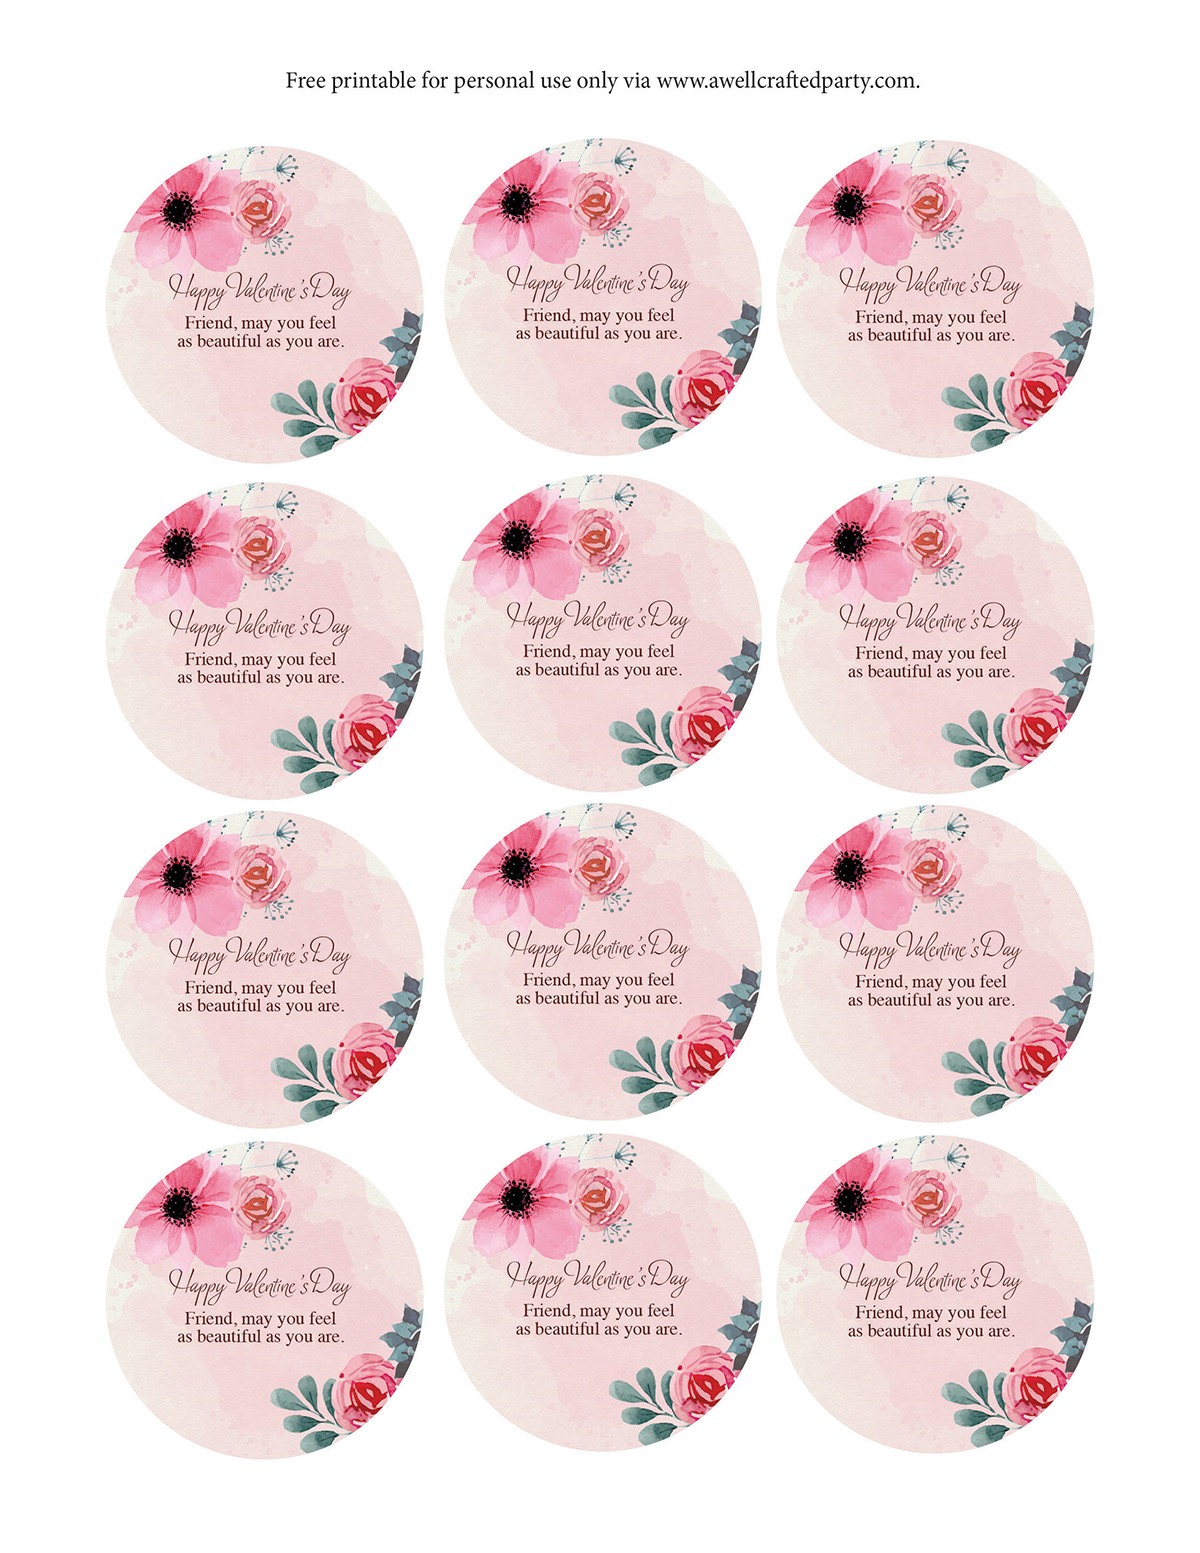 Free Printable Valentine's Day Gift Tags - A Well Crafted Party